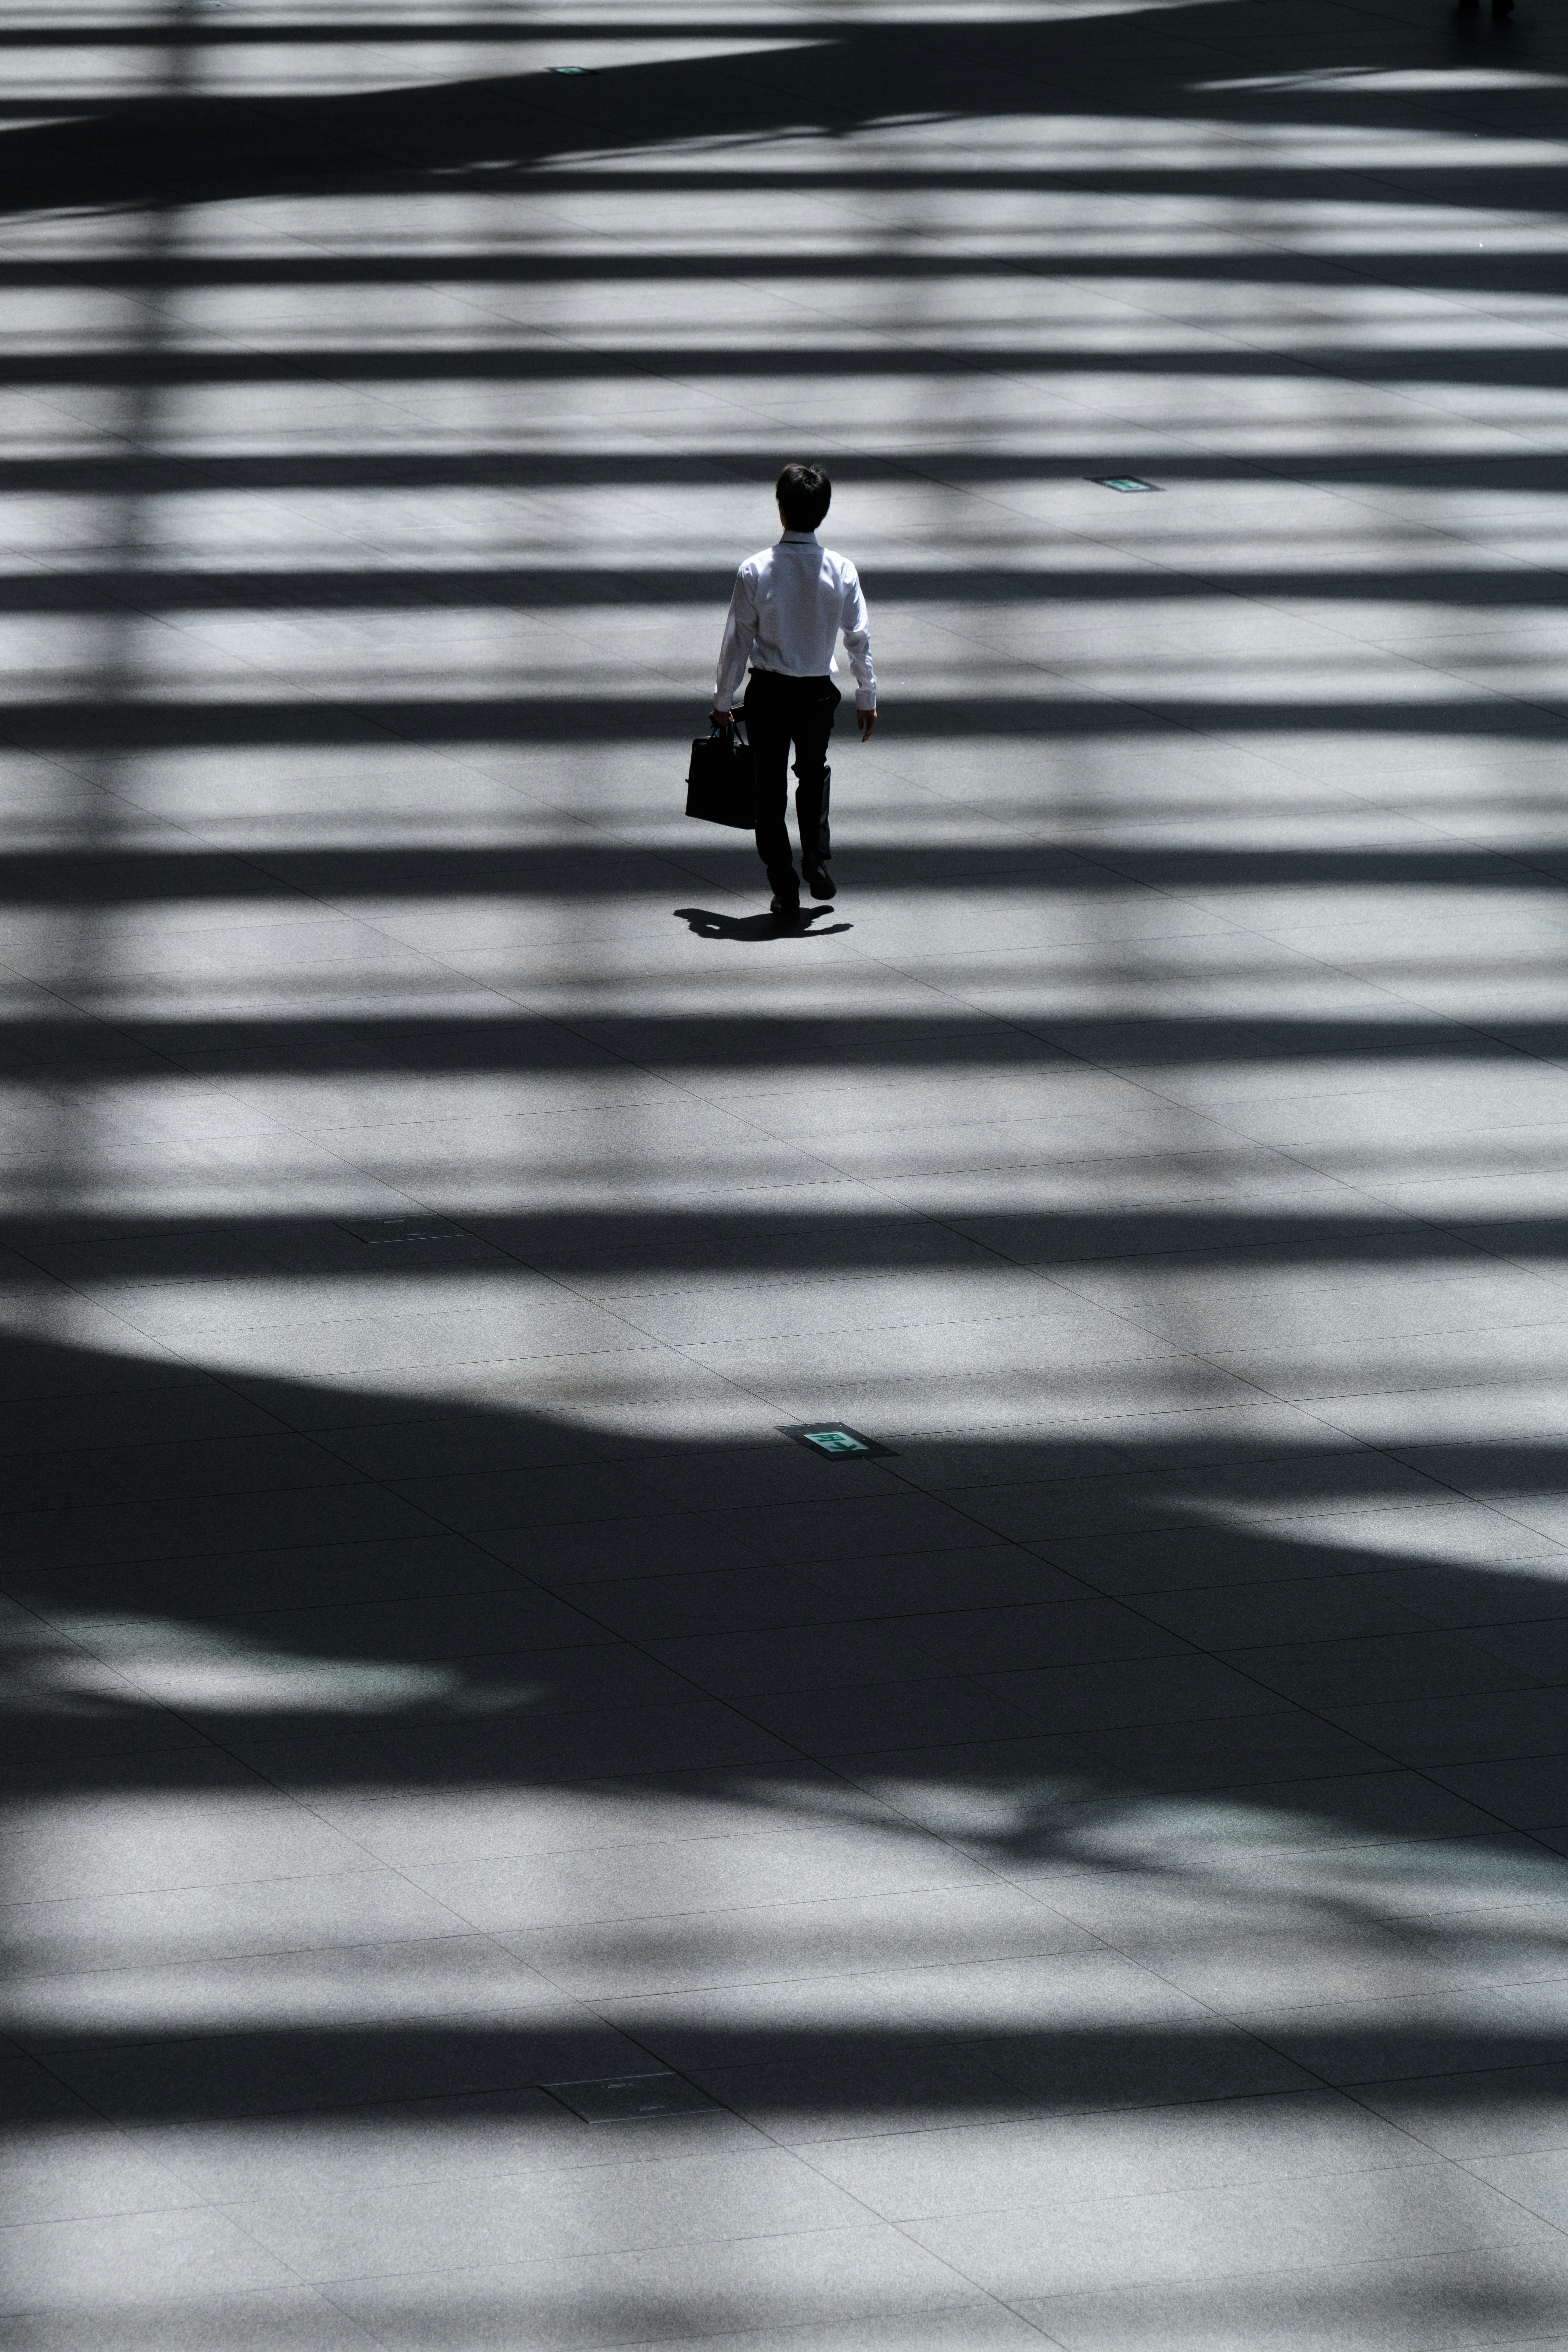 I found the business man walking through the zebra walk made of lights and shadows. White shirt and black pants express the light and shadow.